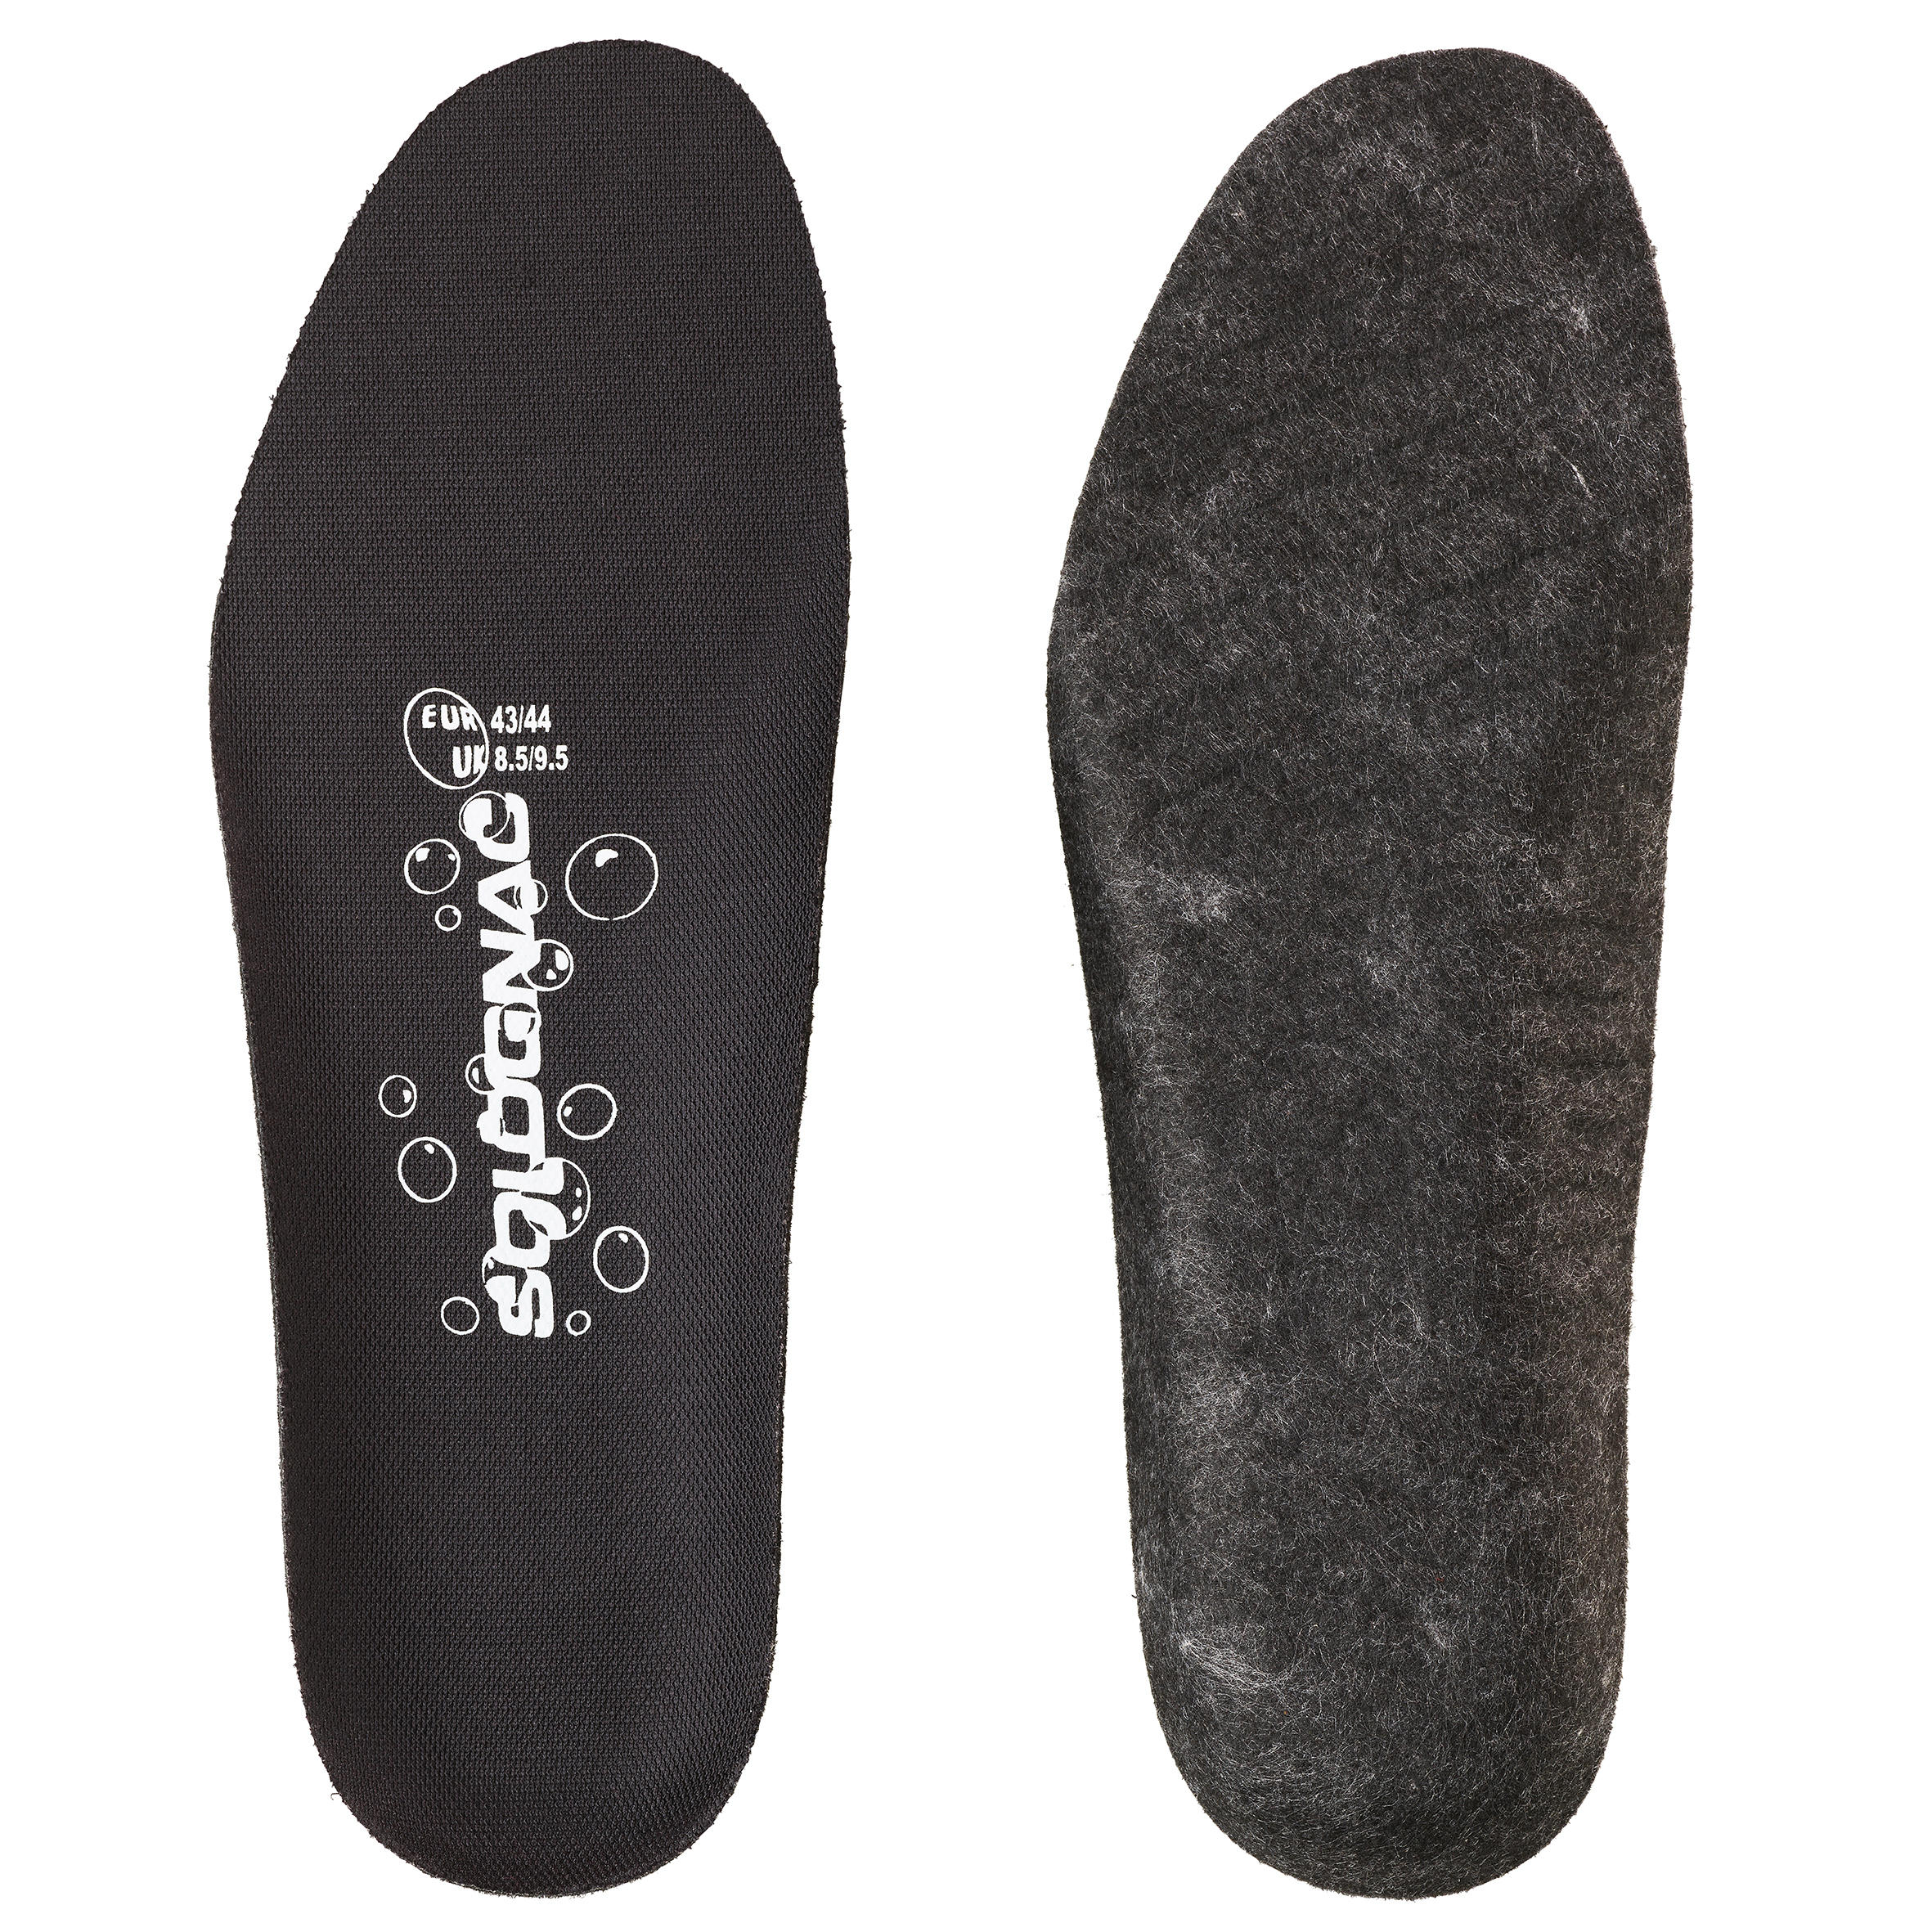 Insoles for Wellies - Black 2/4